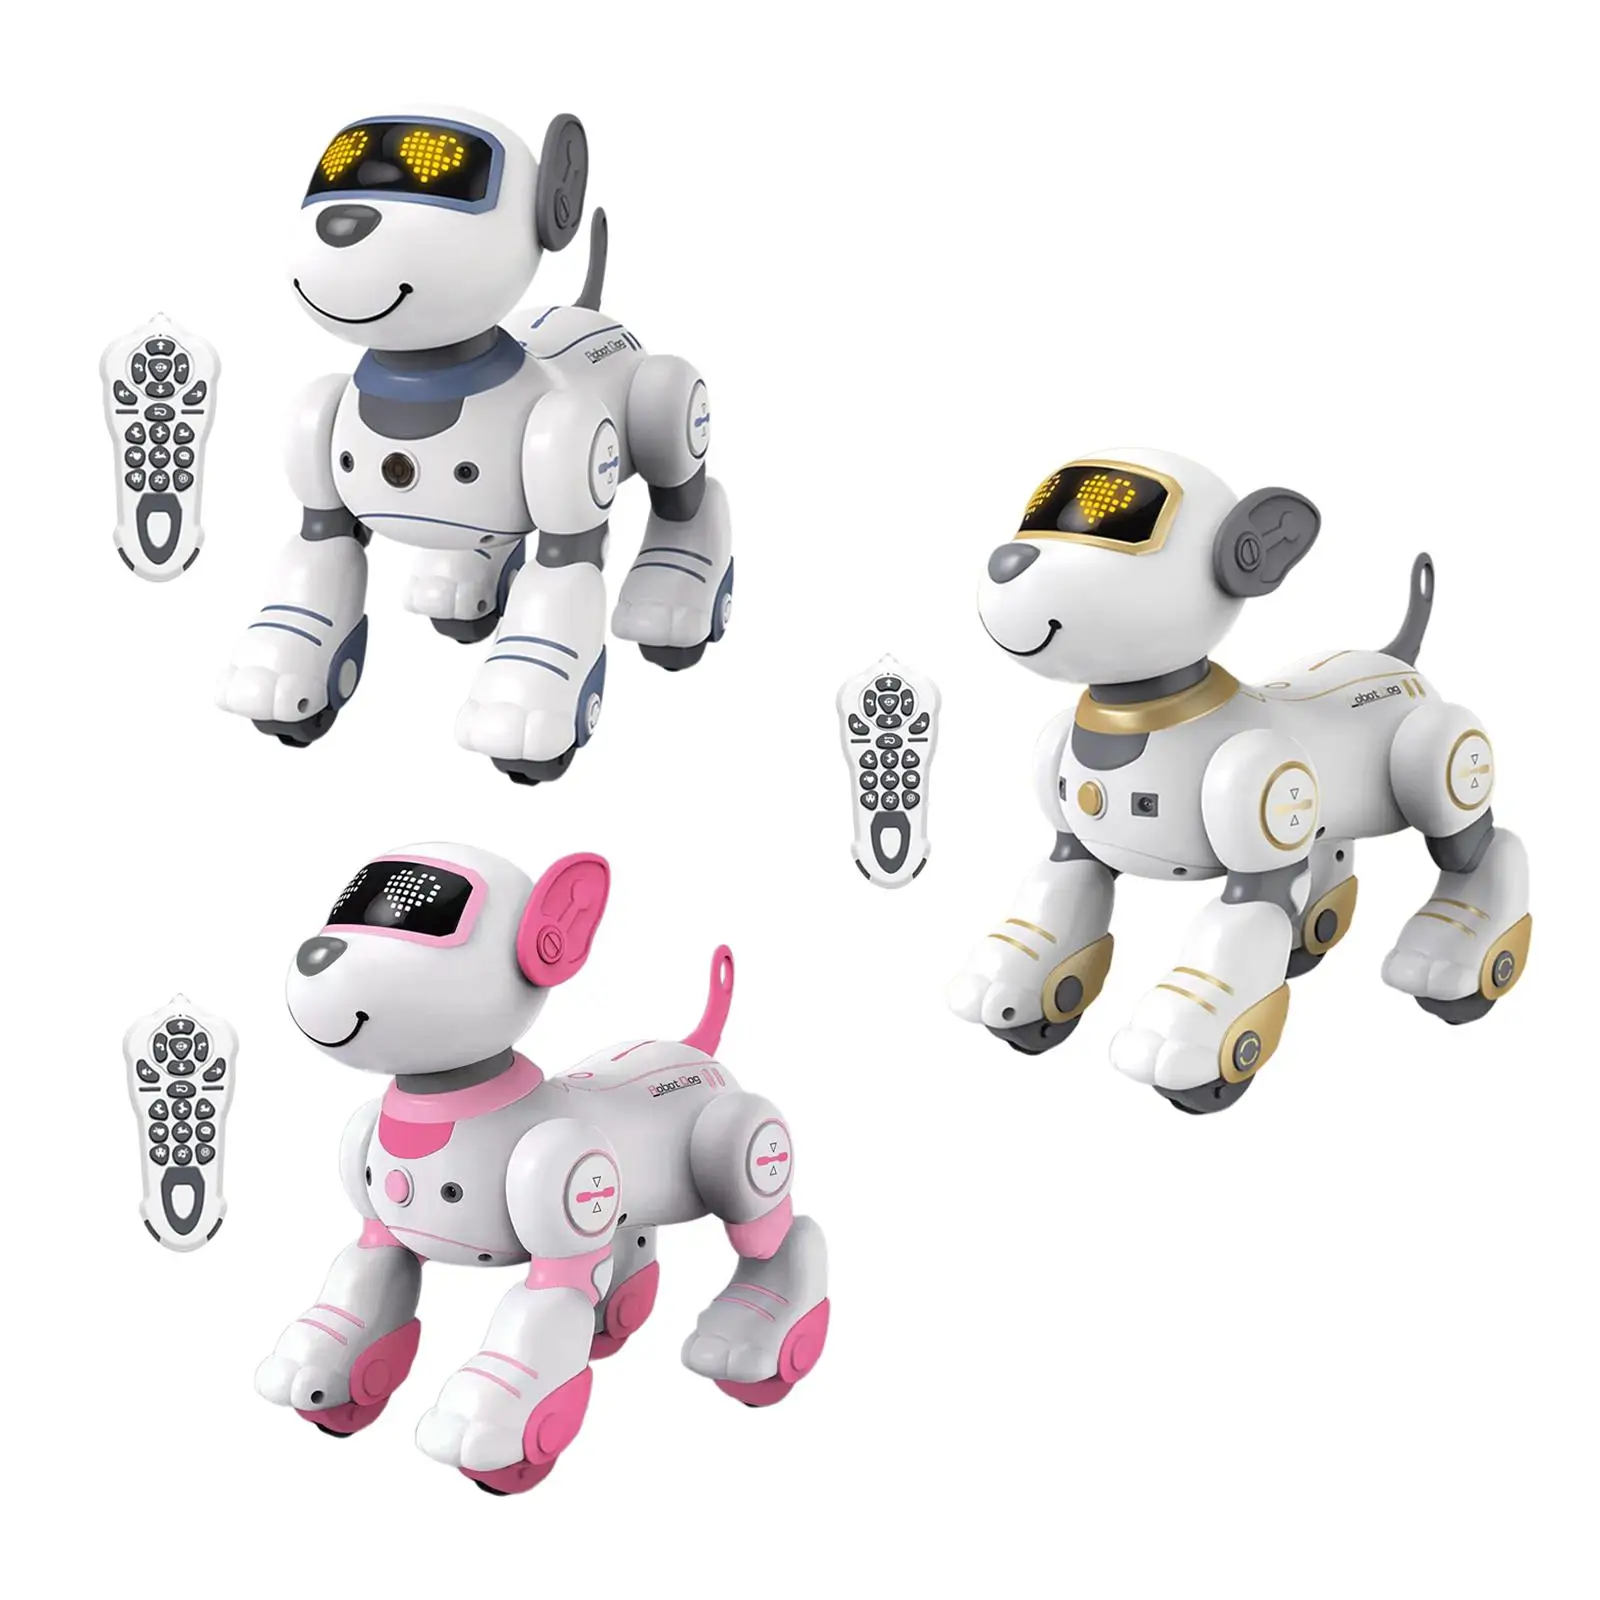 Remote Control Robot Dog Toy Toys Robotic Pet Toy for Birthday Gift